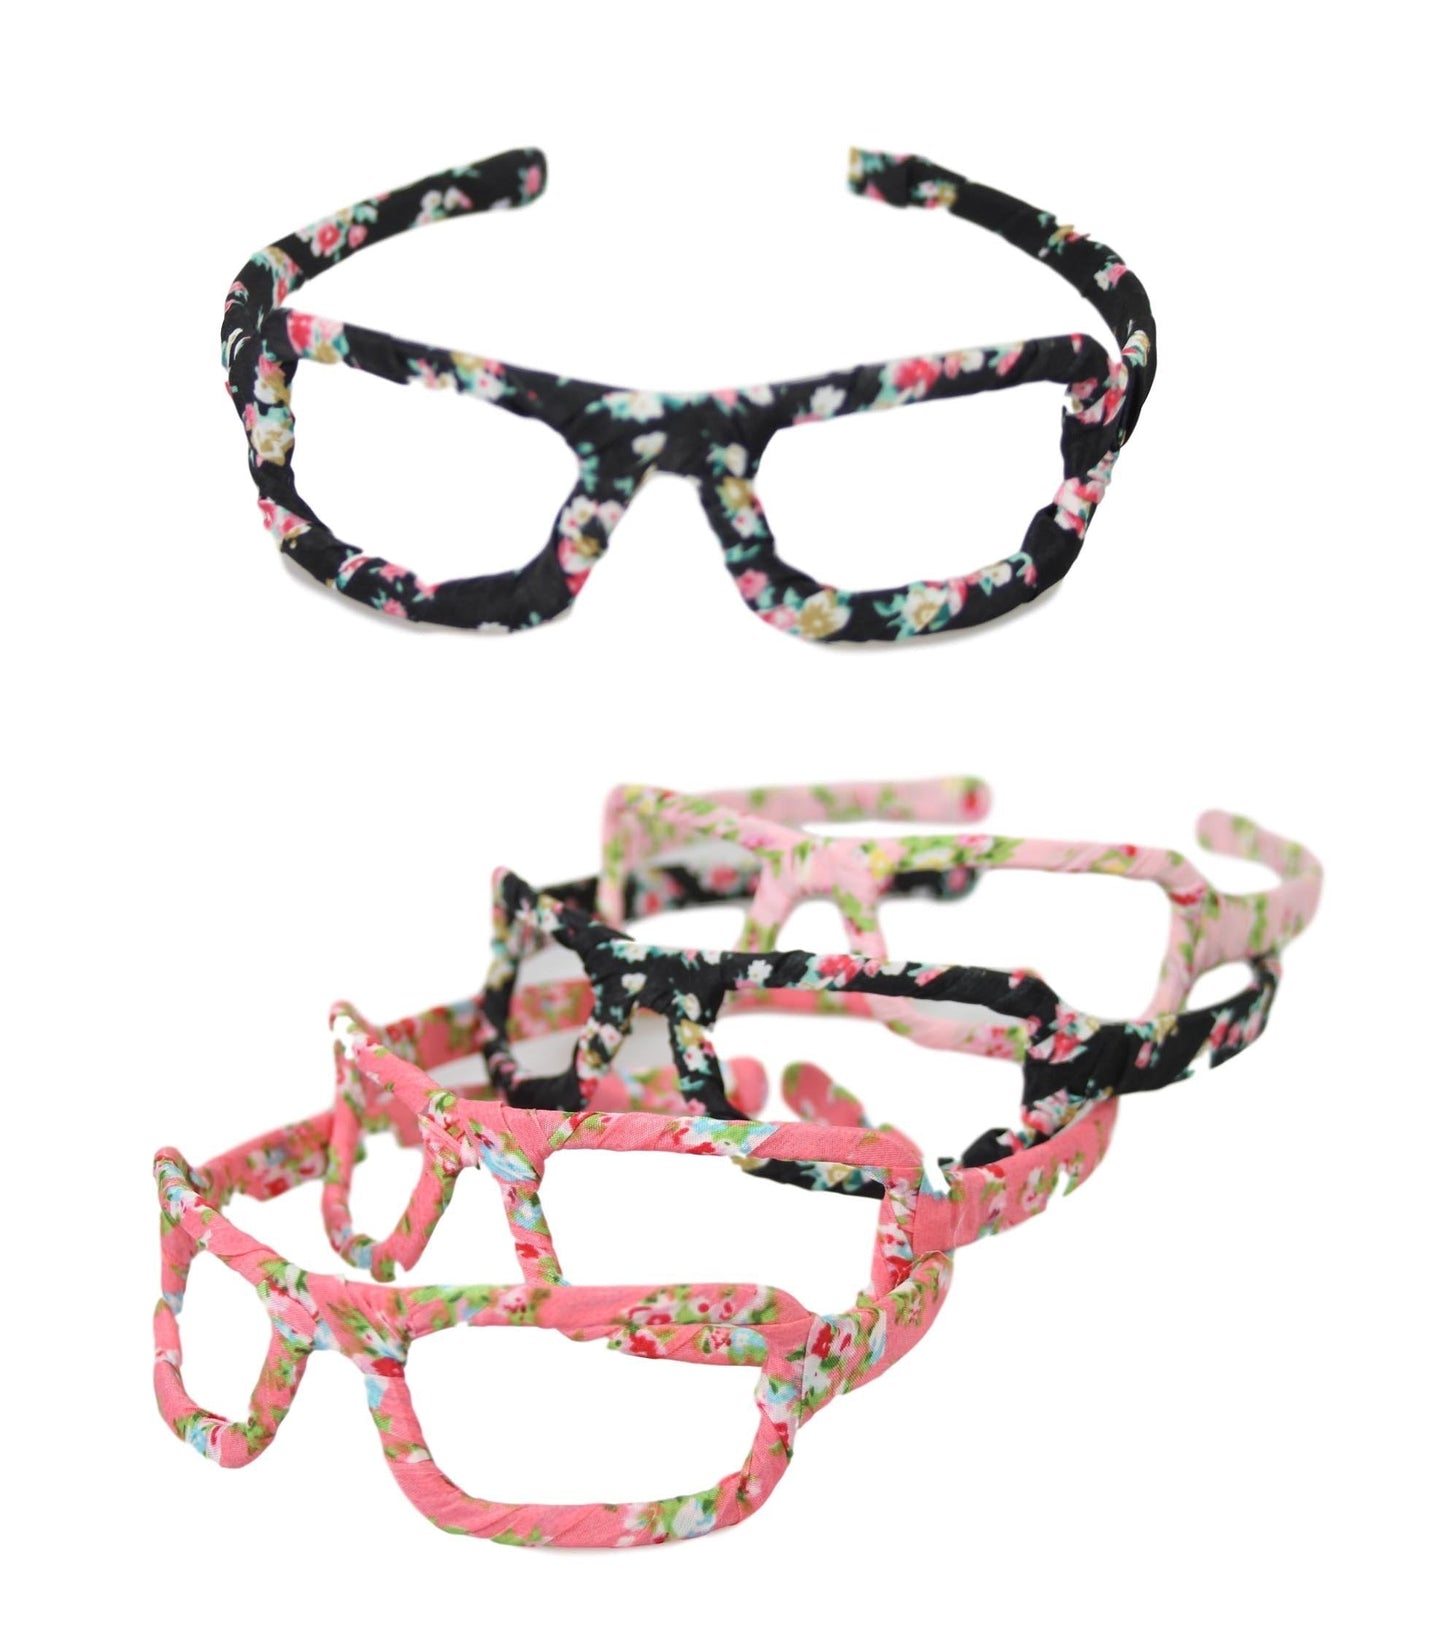 Girls Fancy Fabric Stylish Hair Head Band Glasses Design Assorted Colours 2644 (Large Letter Rate)